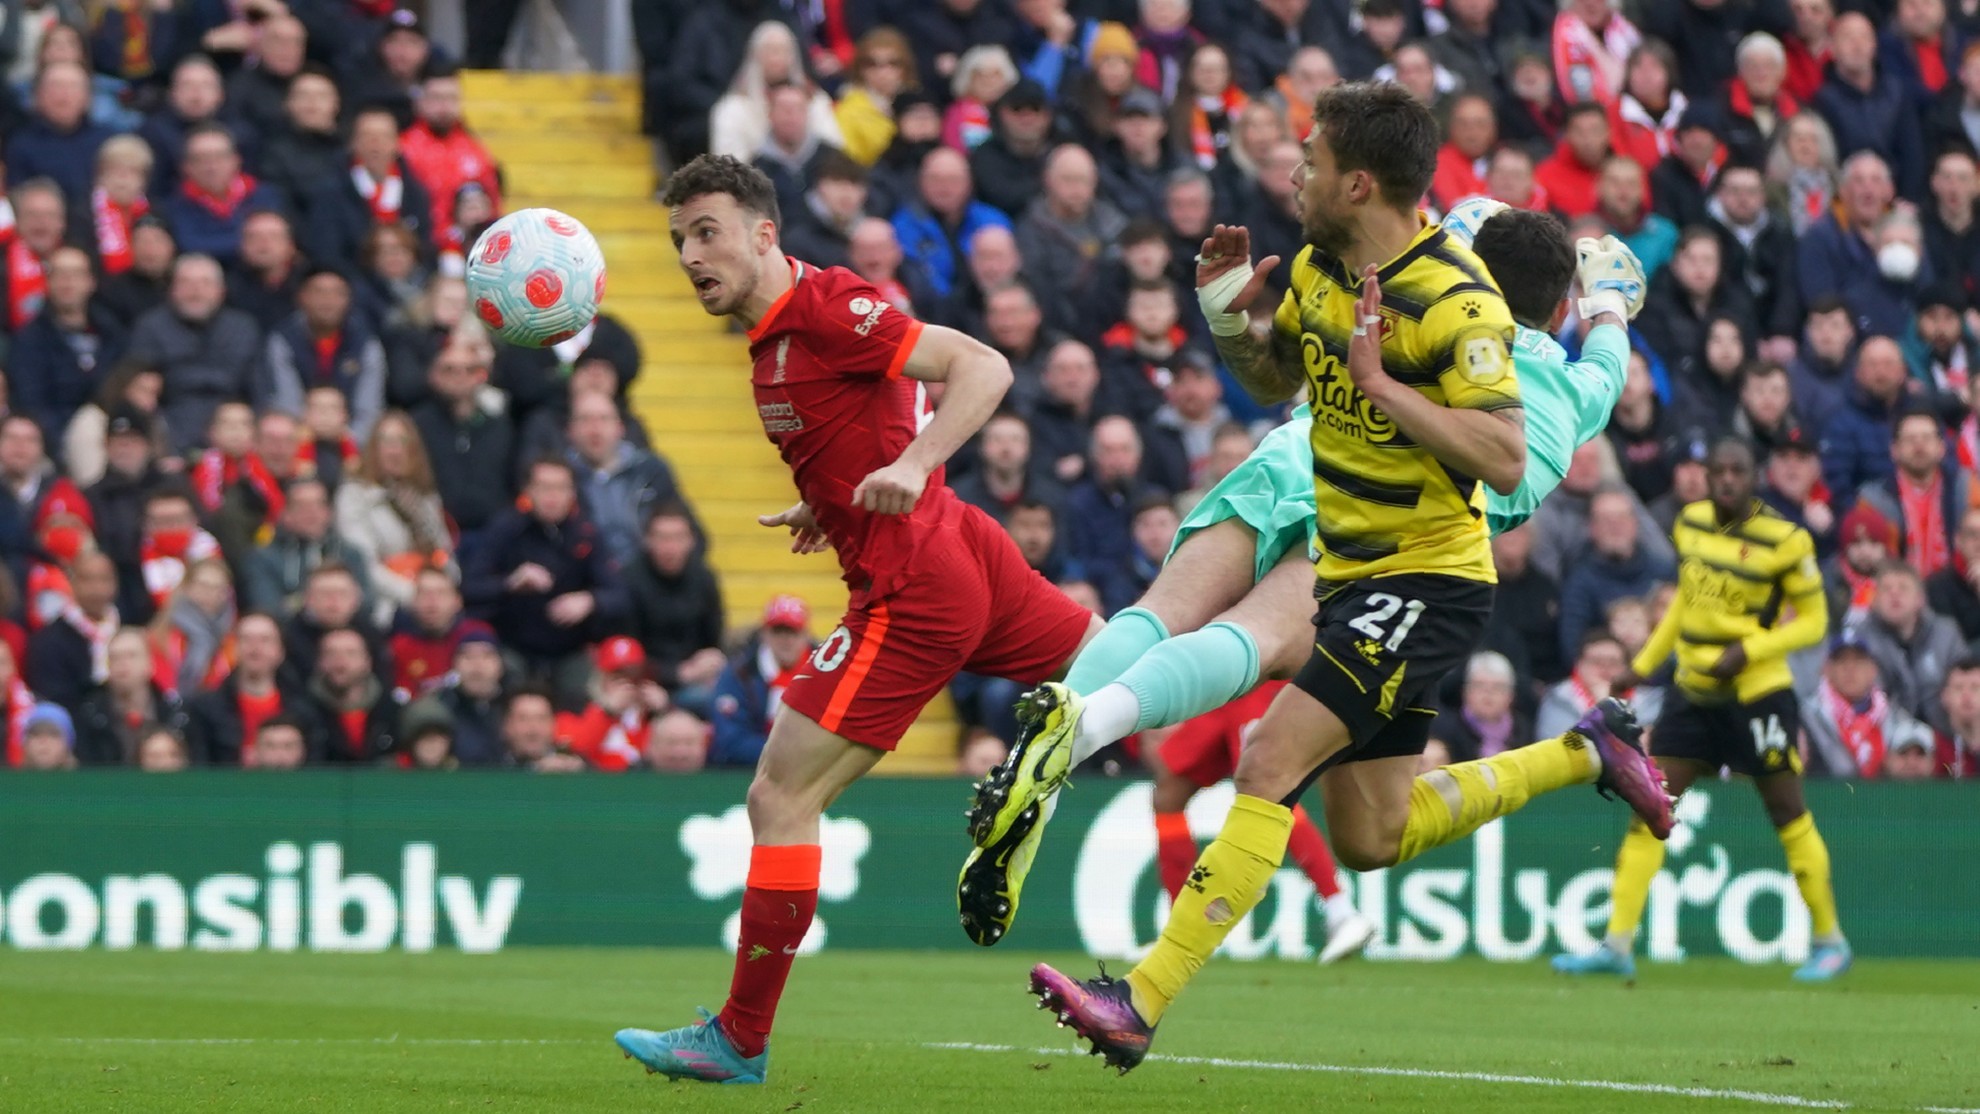 Liverpool beat Watford to go provisionally top of the Premier League table